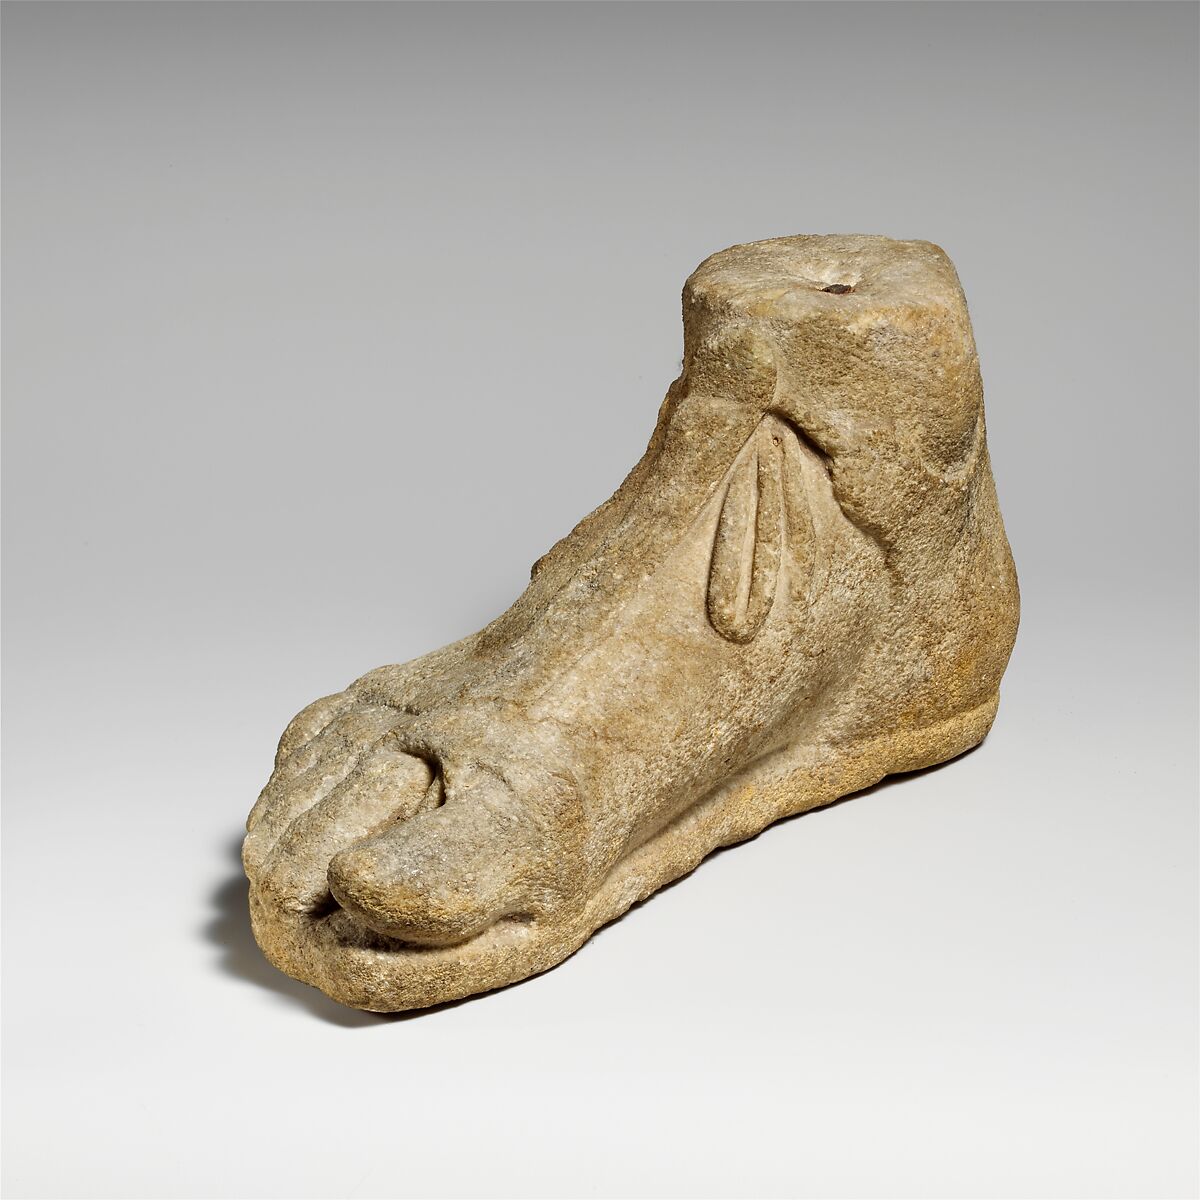 Limestone right foot, White marble, probably Parian, Cypriot 